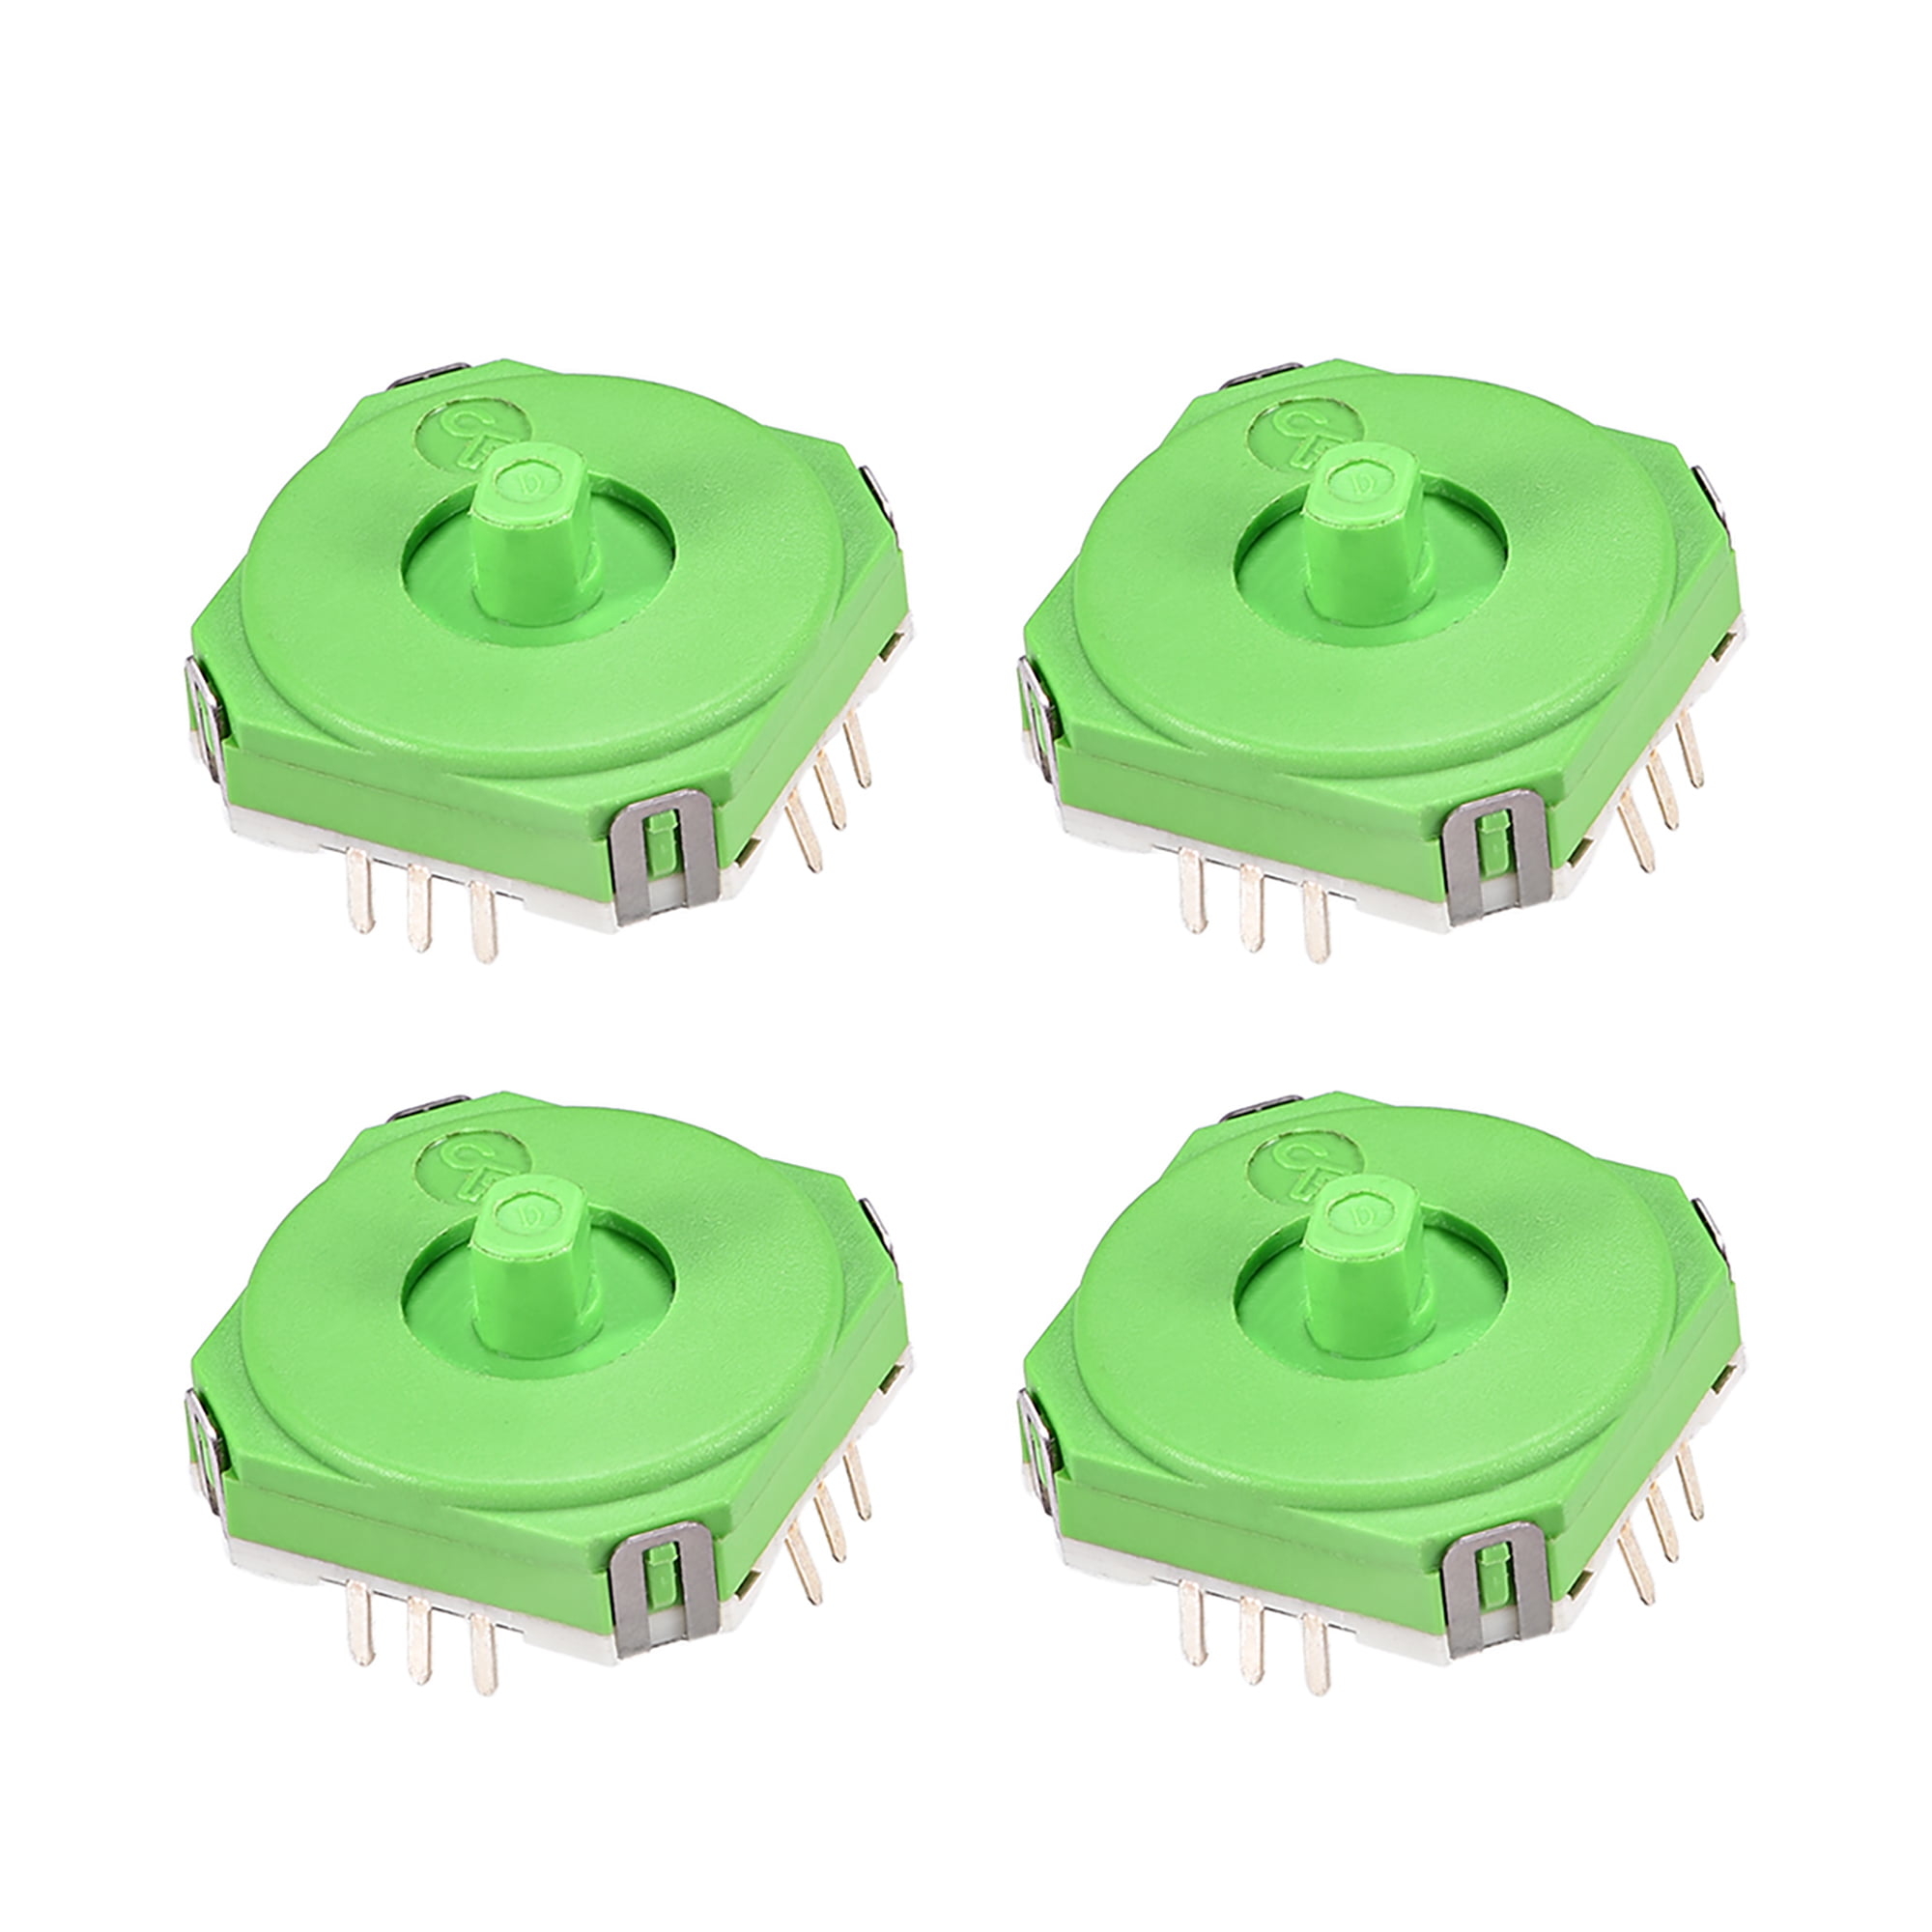 uxcell 5K Omh 3D Analog Joystick Potentiometers with Knobs Wireless Module Controller Rocker Up Down Momentary for Handheld Game Xbox Green 4pcs 